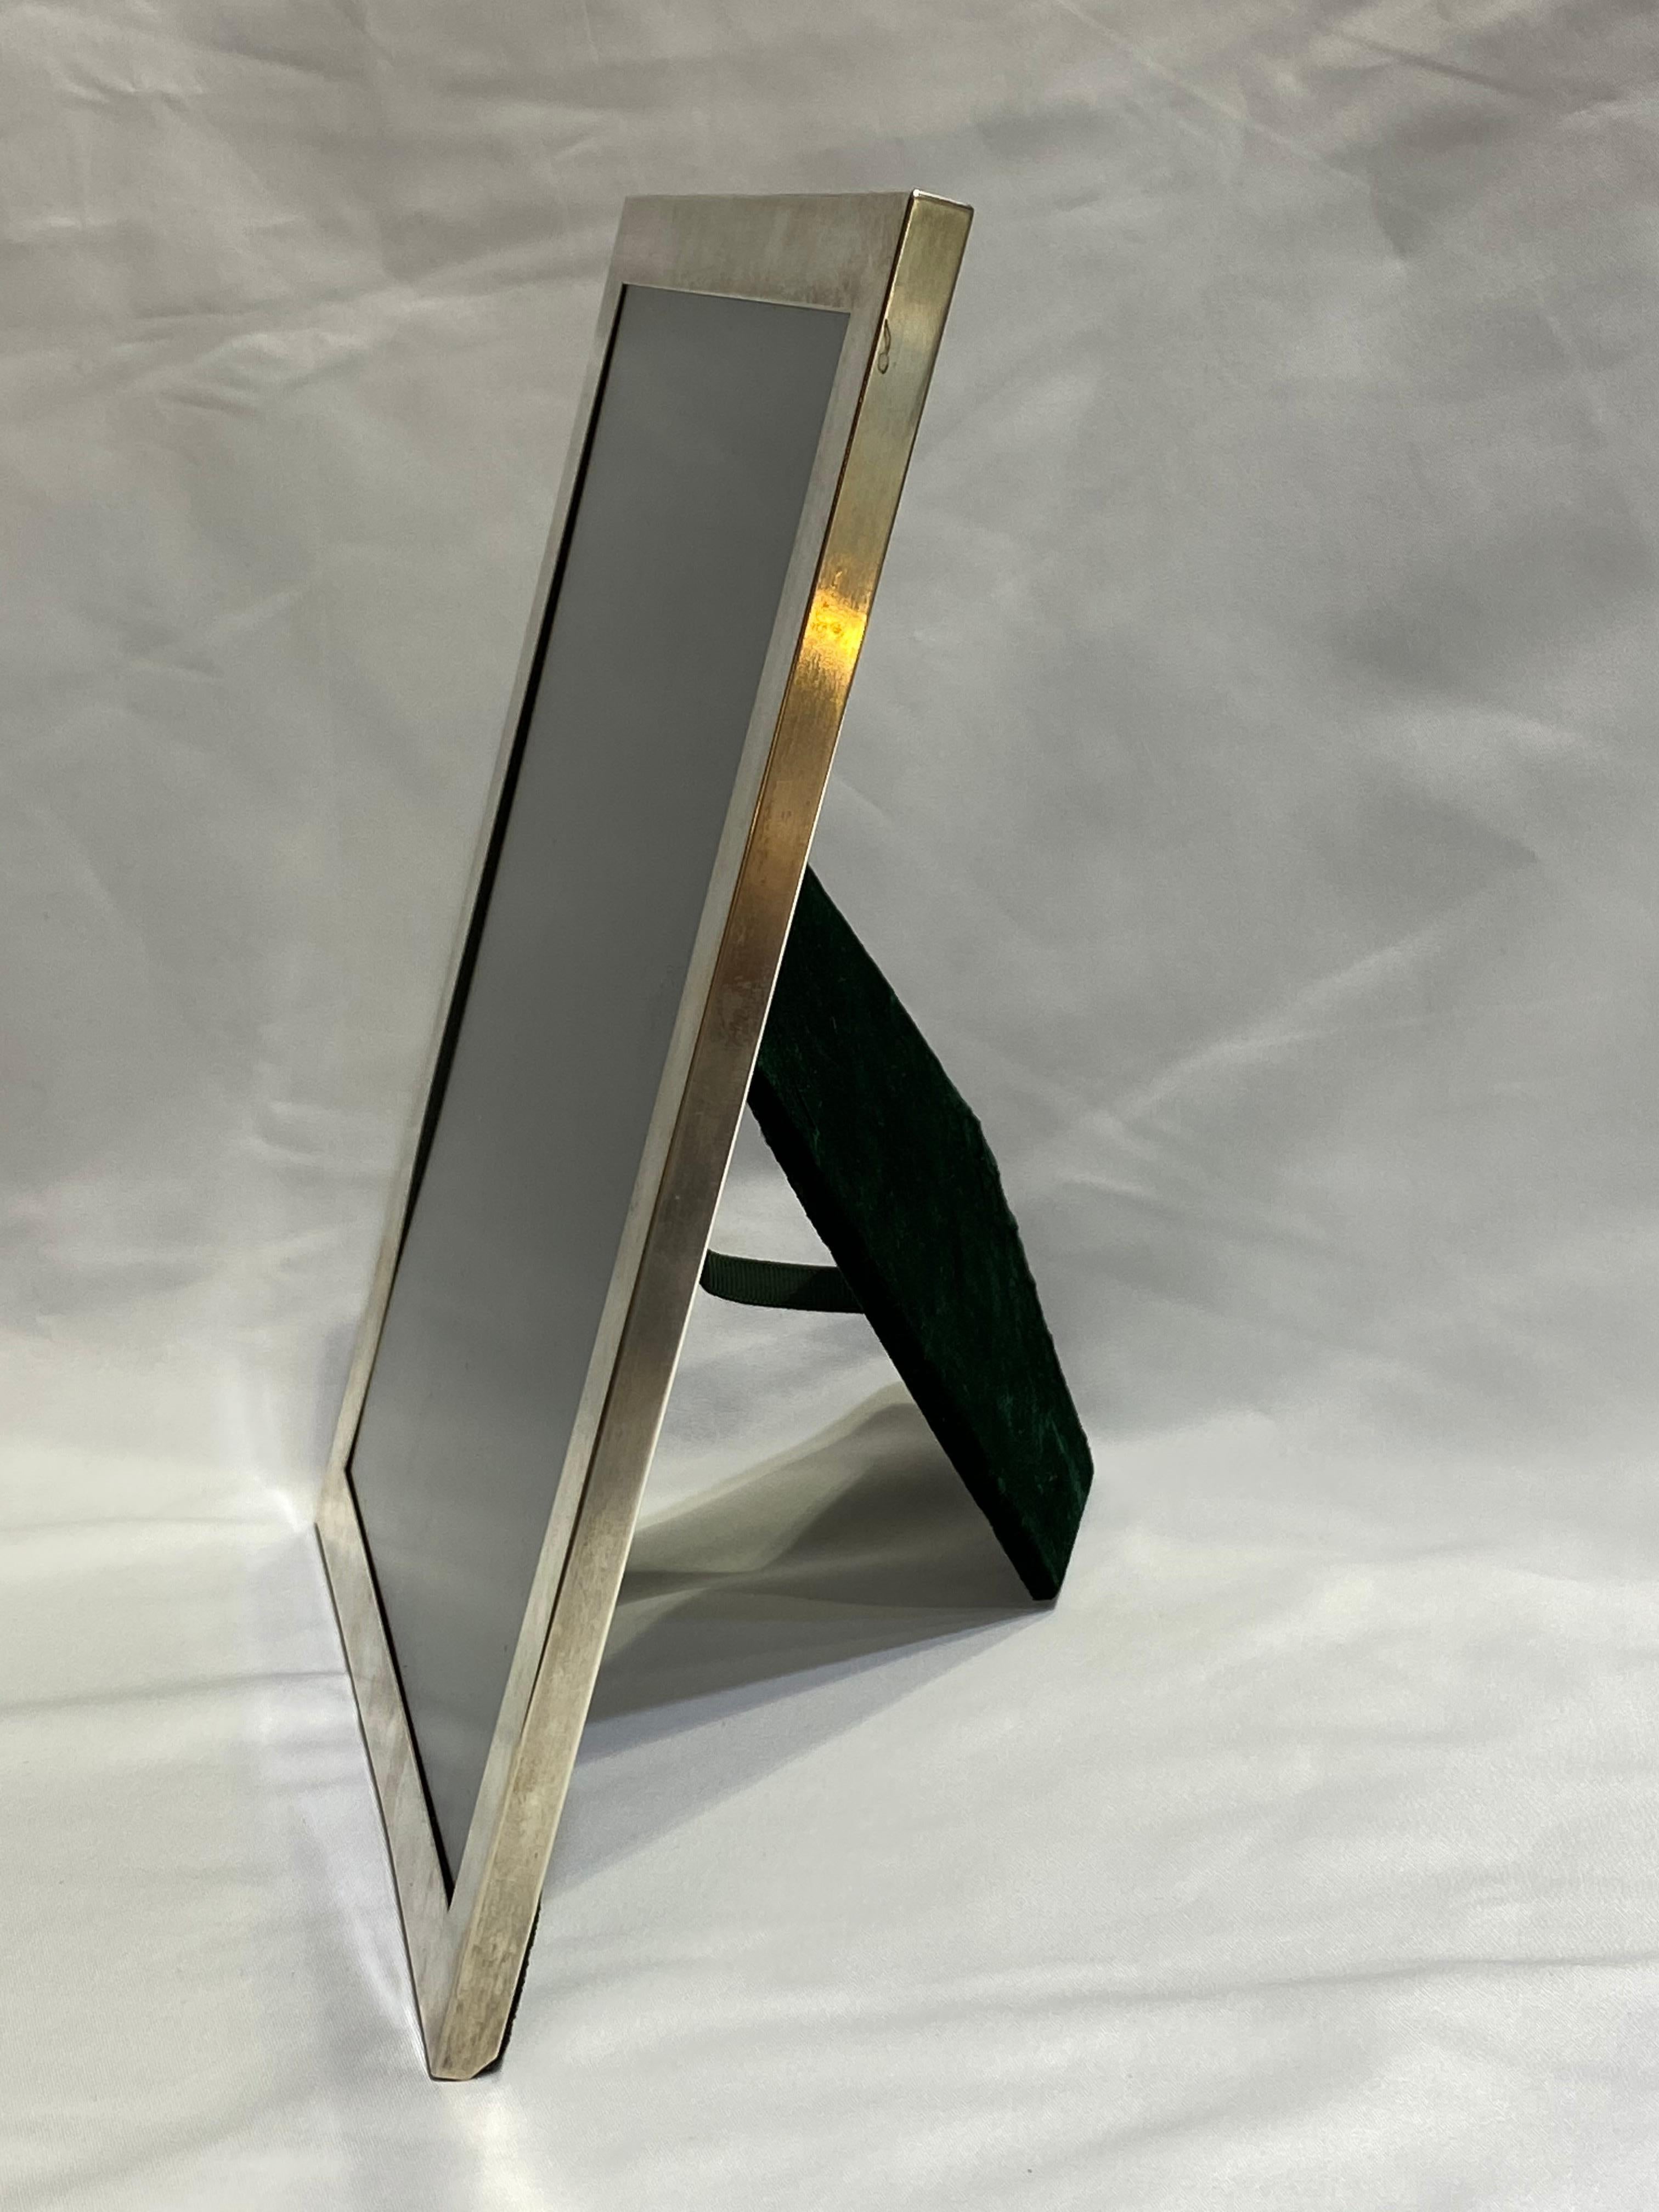 Product details:

Circa 1920's.
Featuring sterling silver frame with glass cover and green velvet closure on the back with a leg for standing and a bail for hanging the frame. The width of the silver frame is 0.63